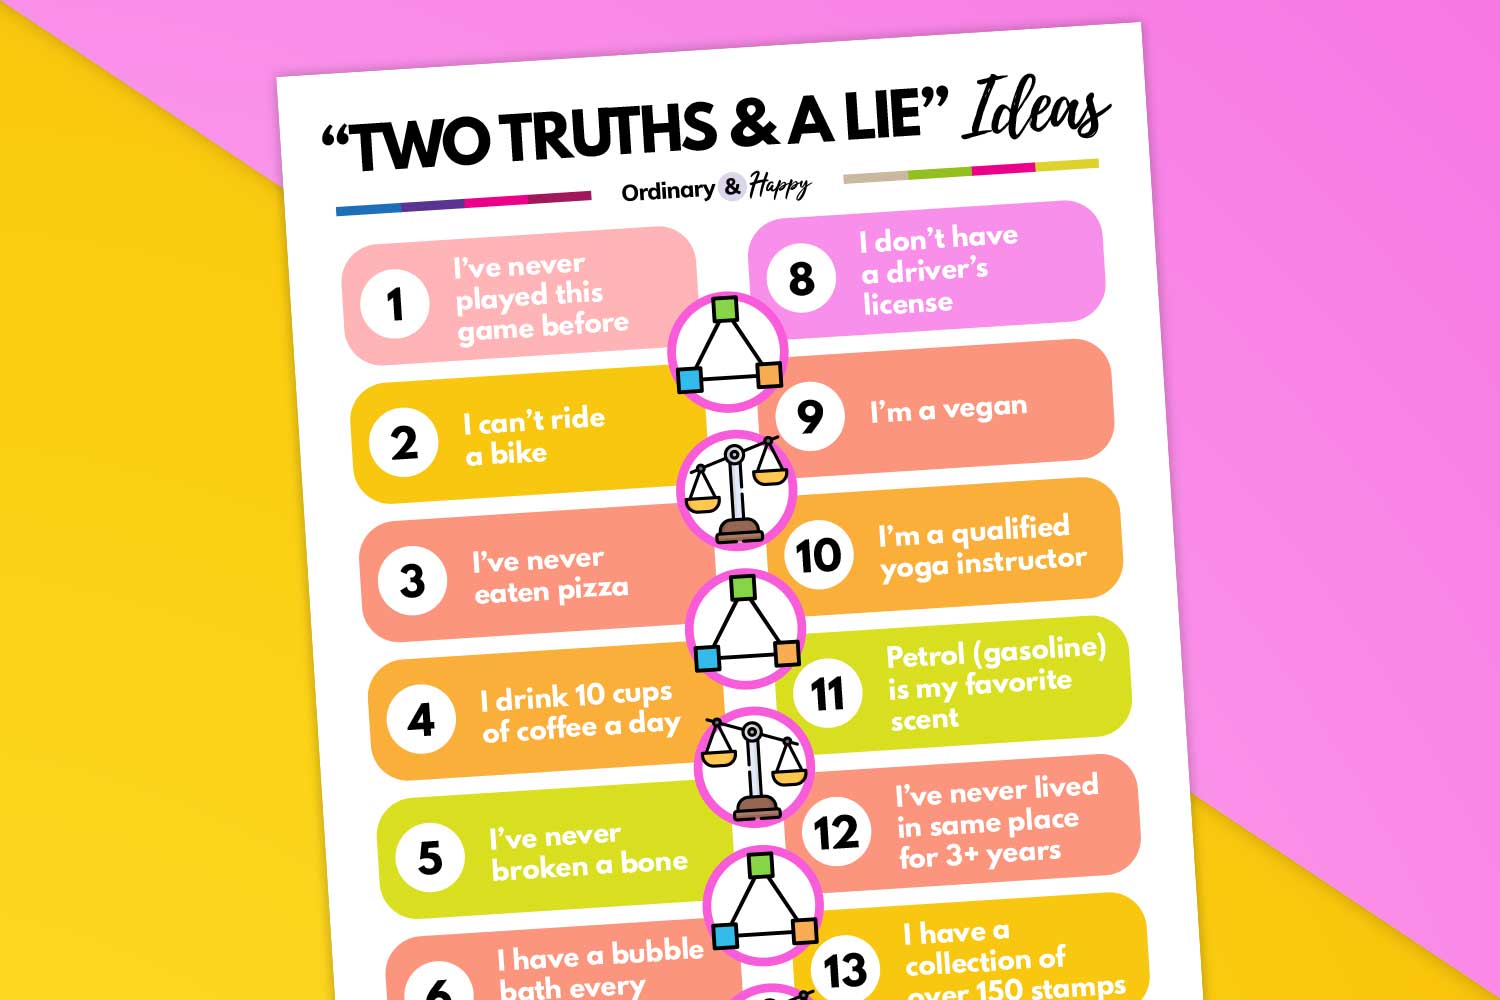 Two Truths and a Lie: 200+ Best Lie Ideas - Ordinary and Happy